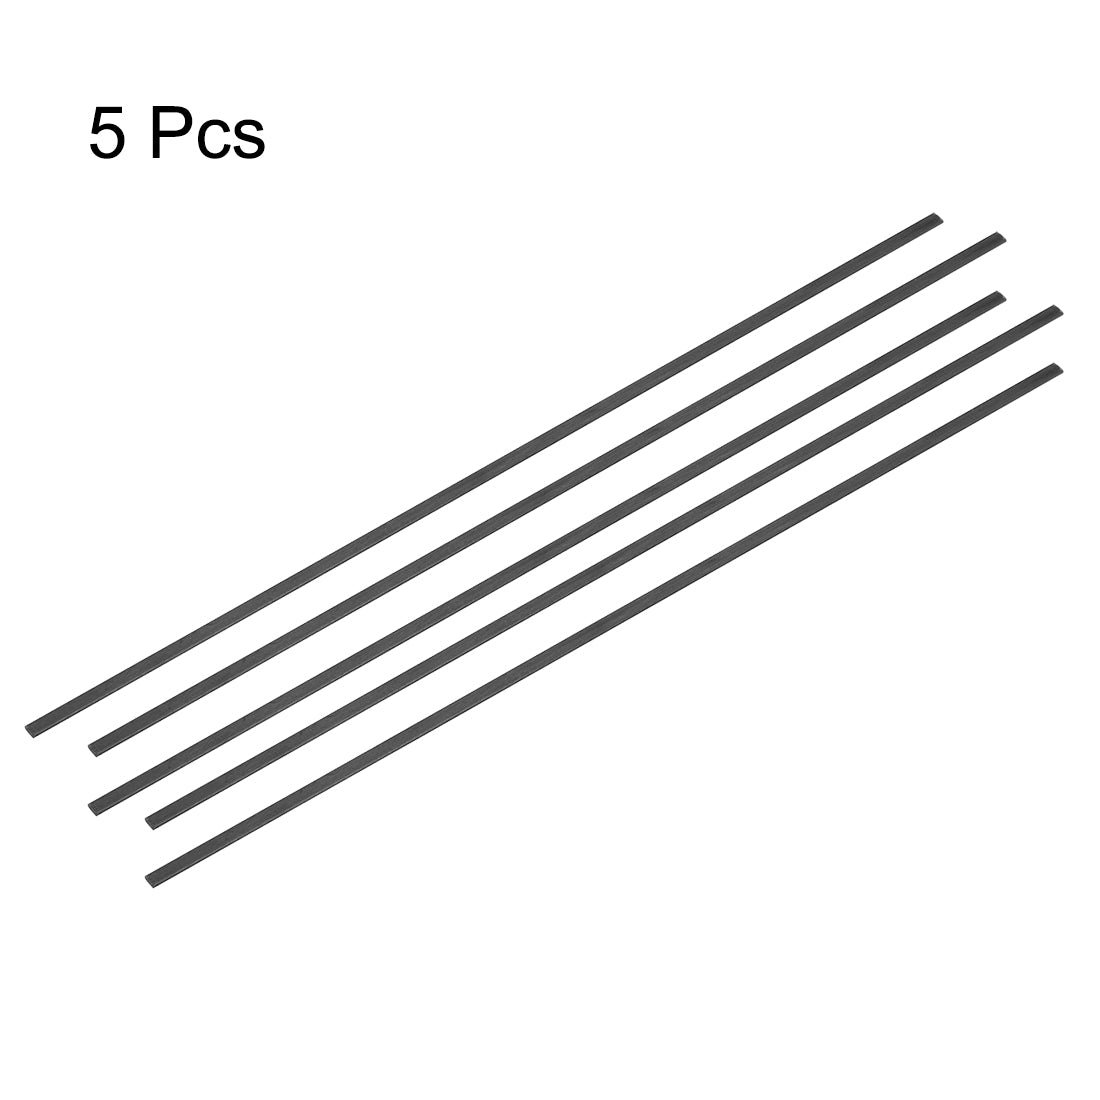 uxcell Uxcell Carbon Fiber Strip Bars 1x3mm 400mm Length Pultruded Carbon Fiber Strips for Kites, RC Airplane 5 Pcs